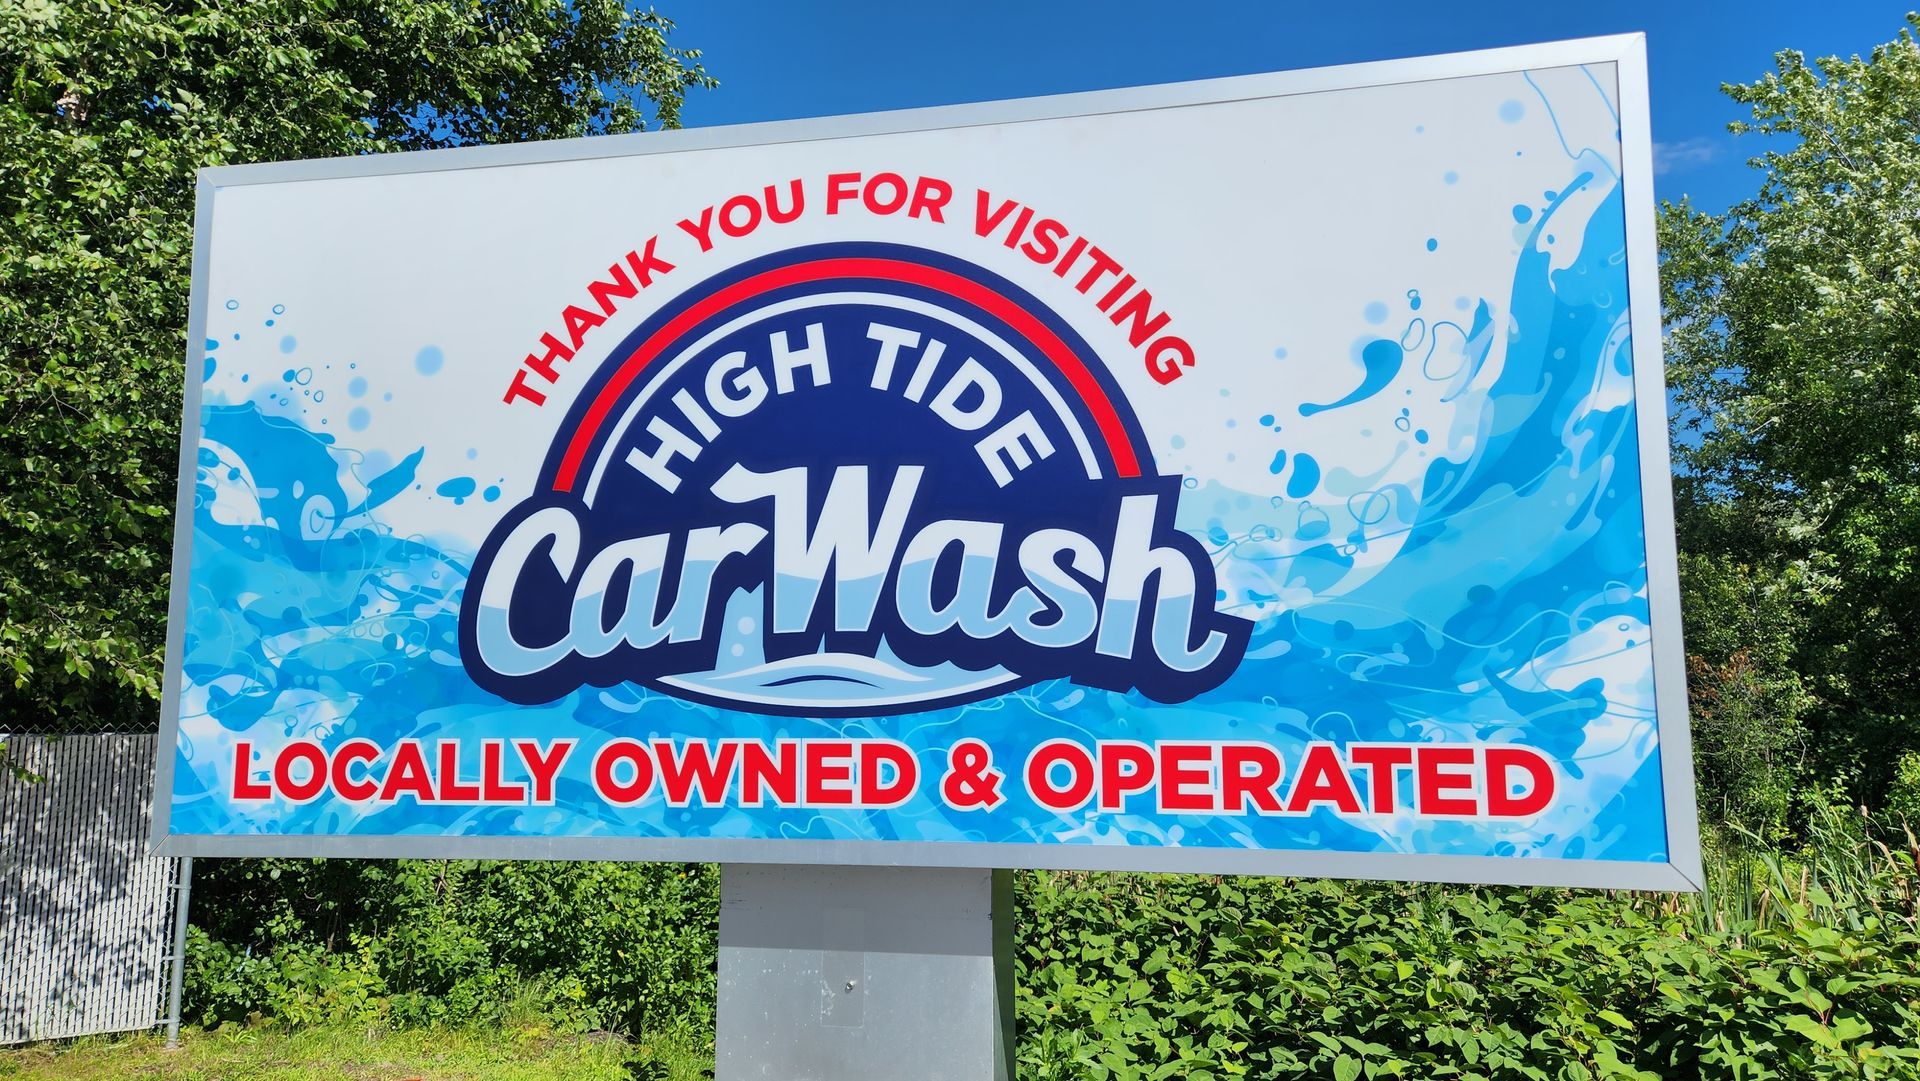 locally owned and operated car wash high tide carwash